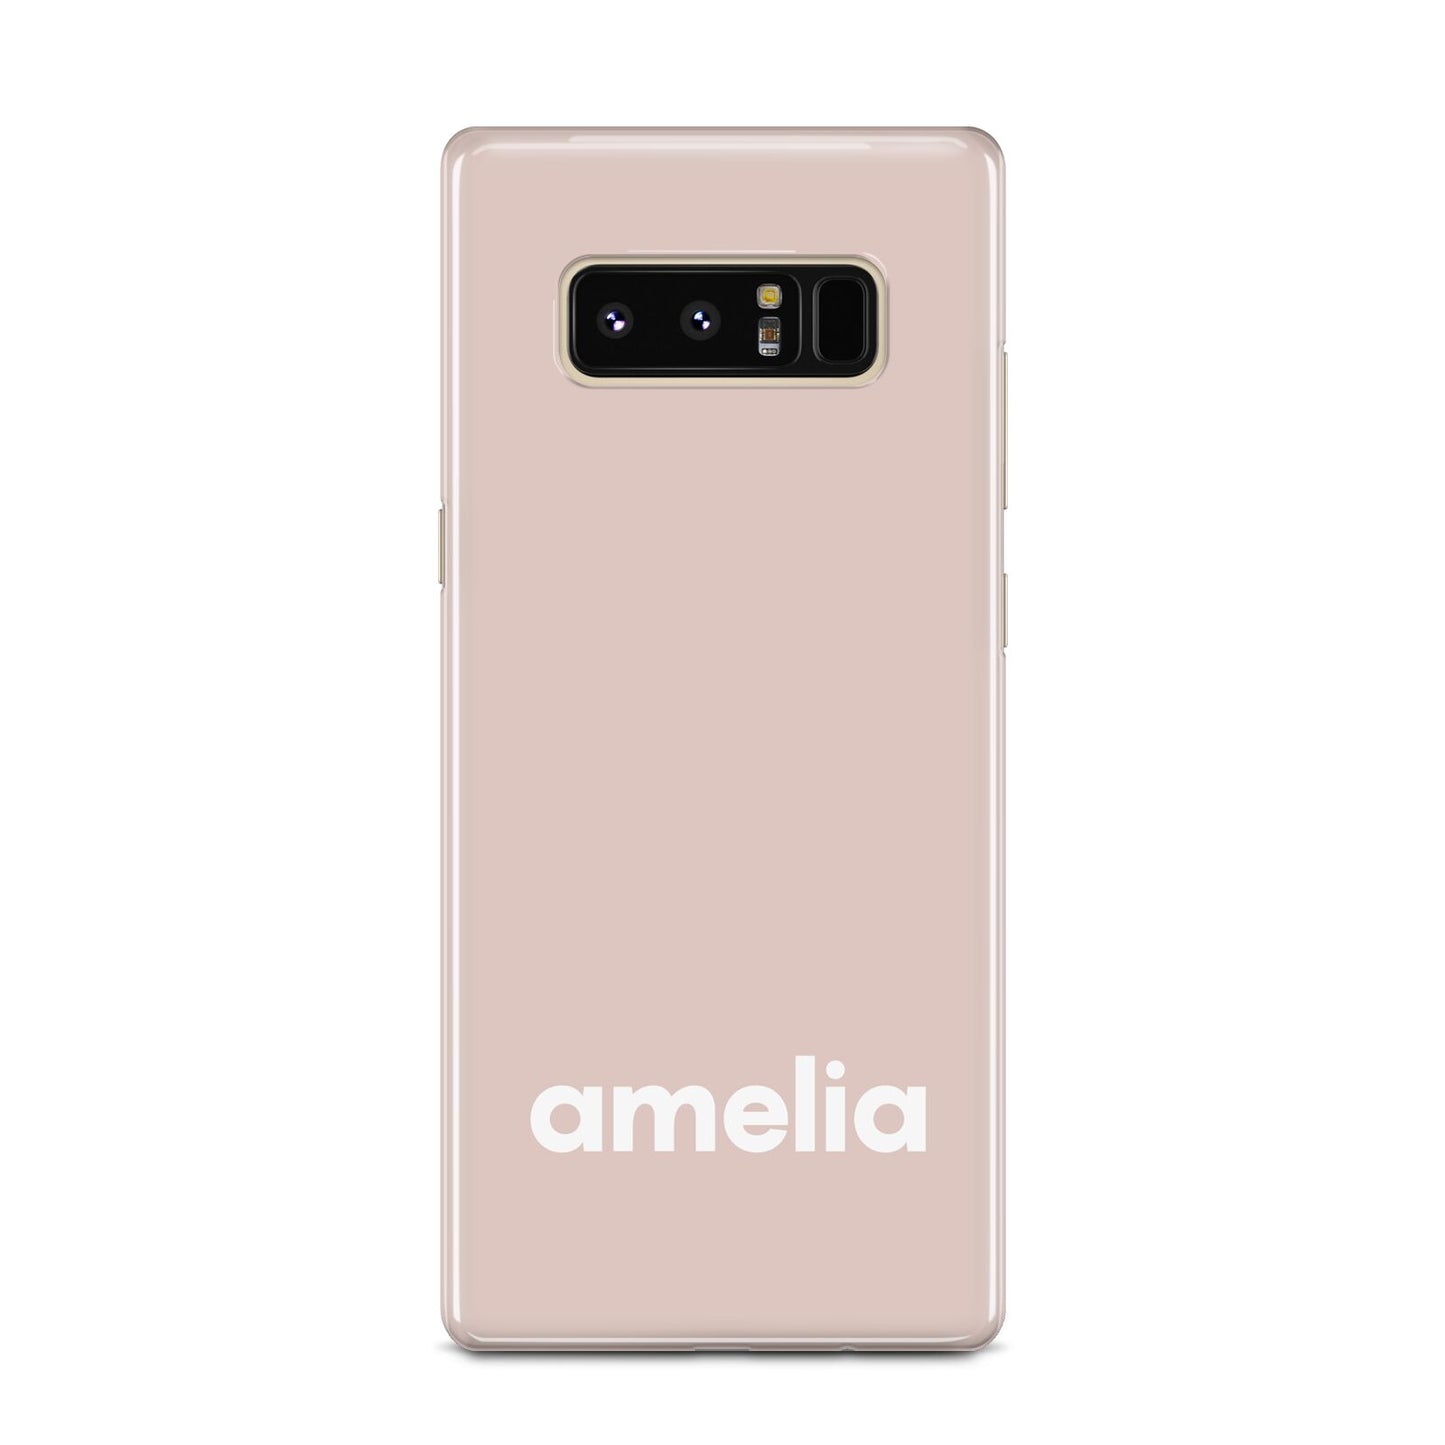 Simple Blush Pink with Name Samsung Galaxy Note 8 Case